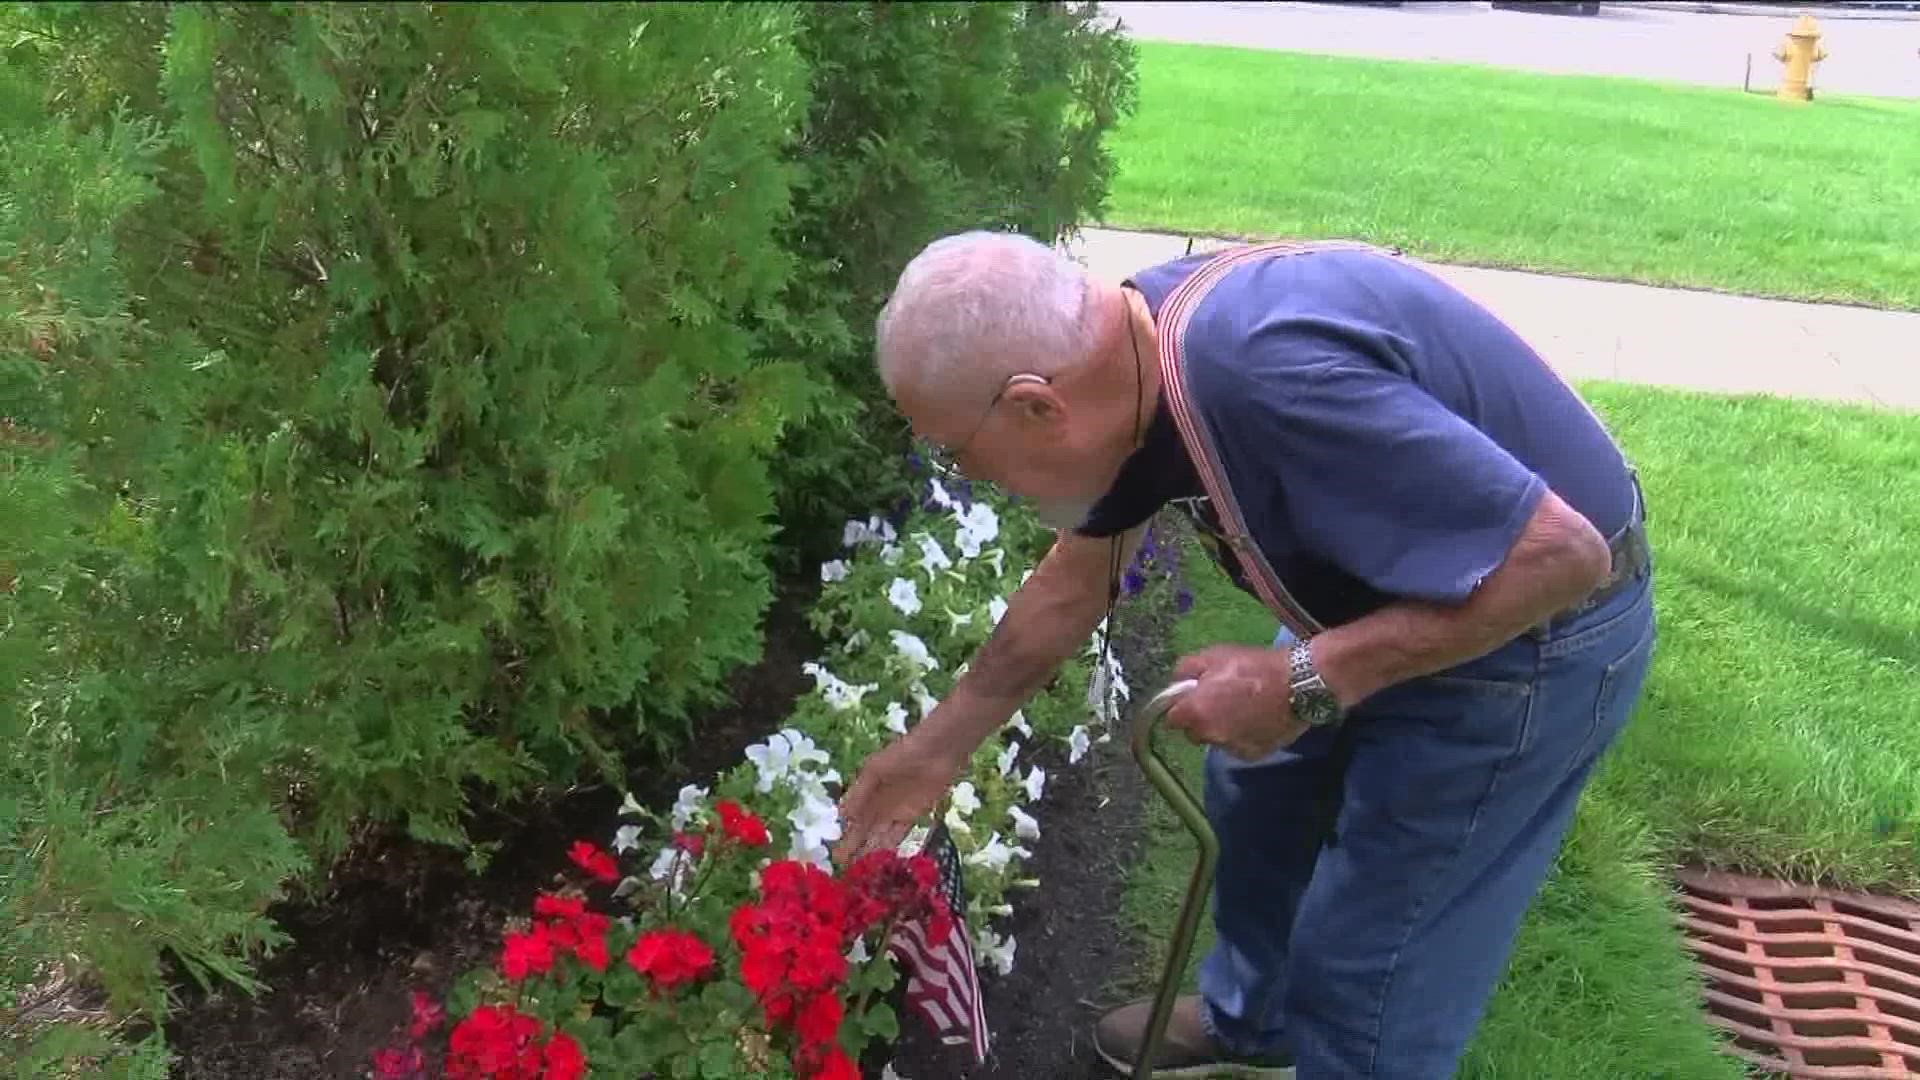 93-year-old man grows fabulous gardens at senior living facility to honor his wife, who died in March.